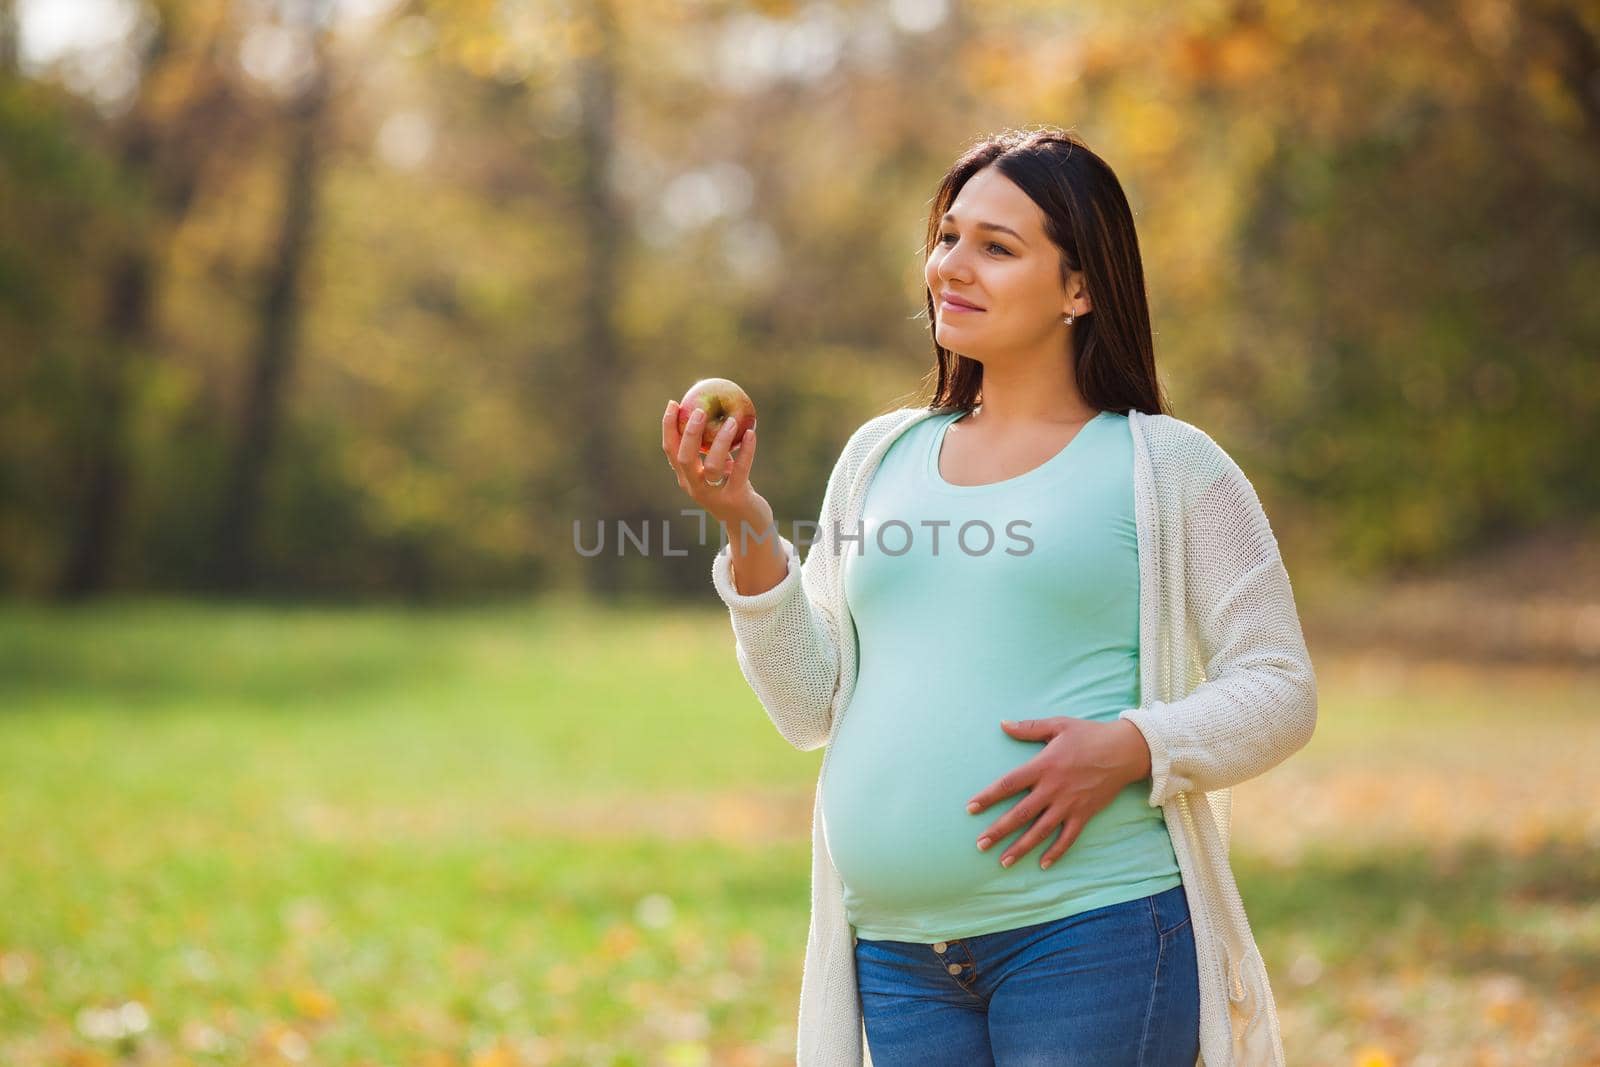 Pregnant woman relaxing in park. She is eating apple.